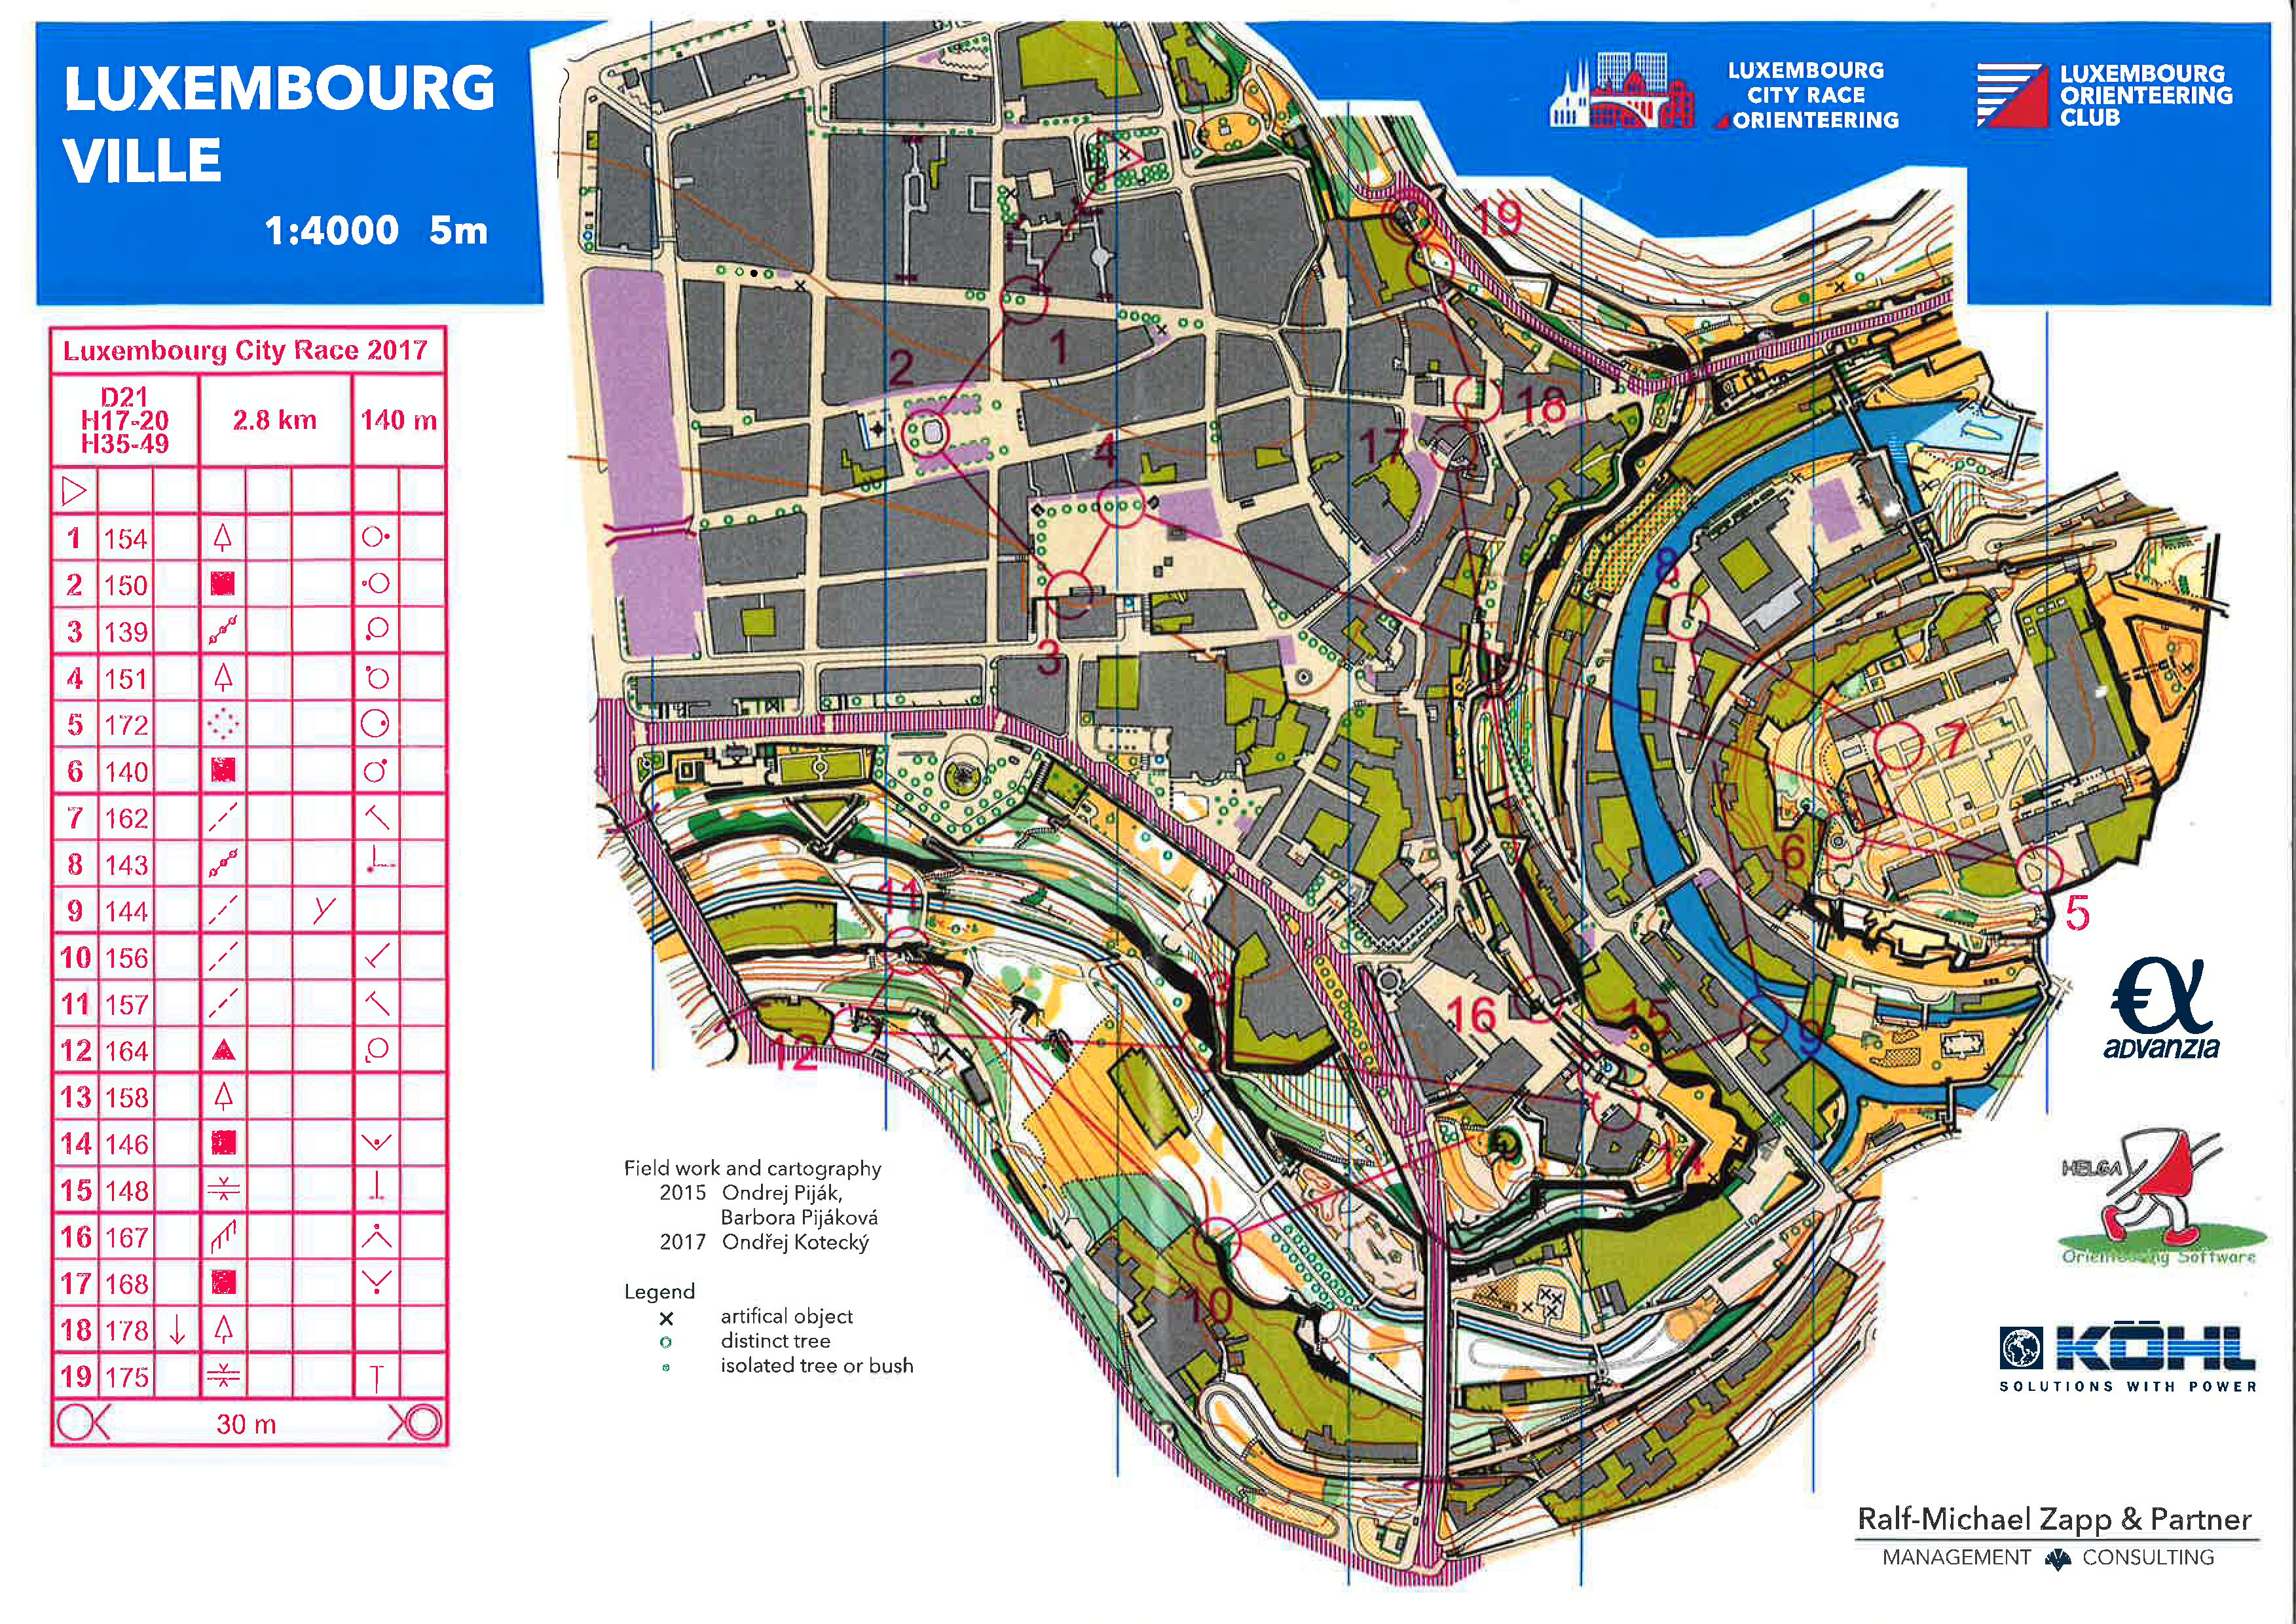 Luxembourg City Race (05/11/2017)